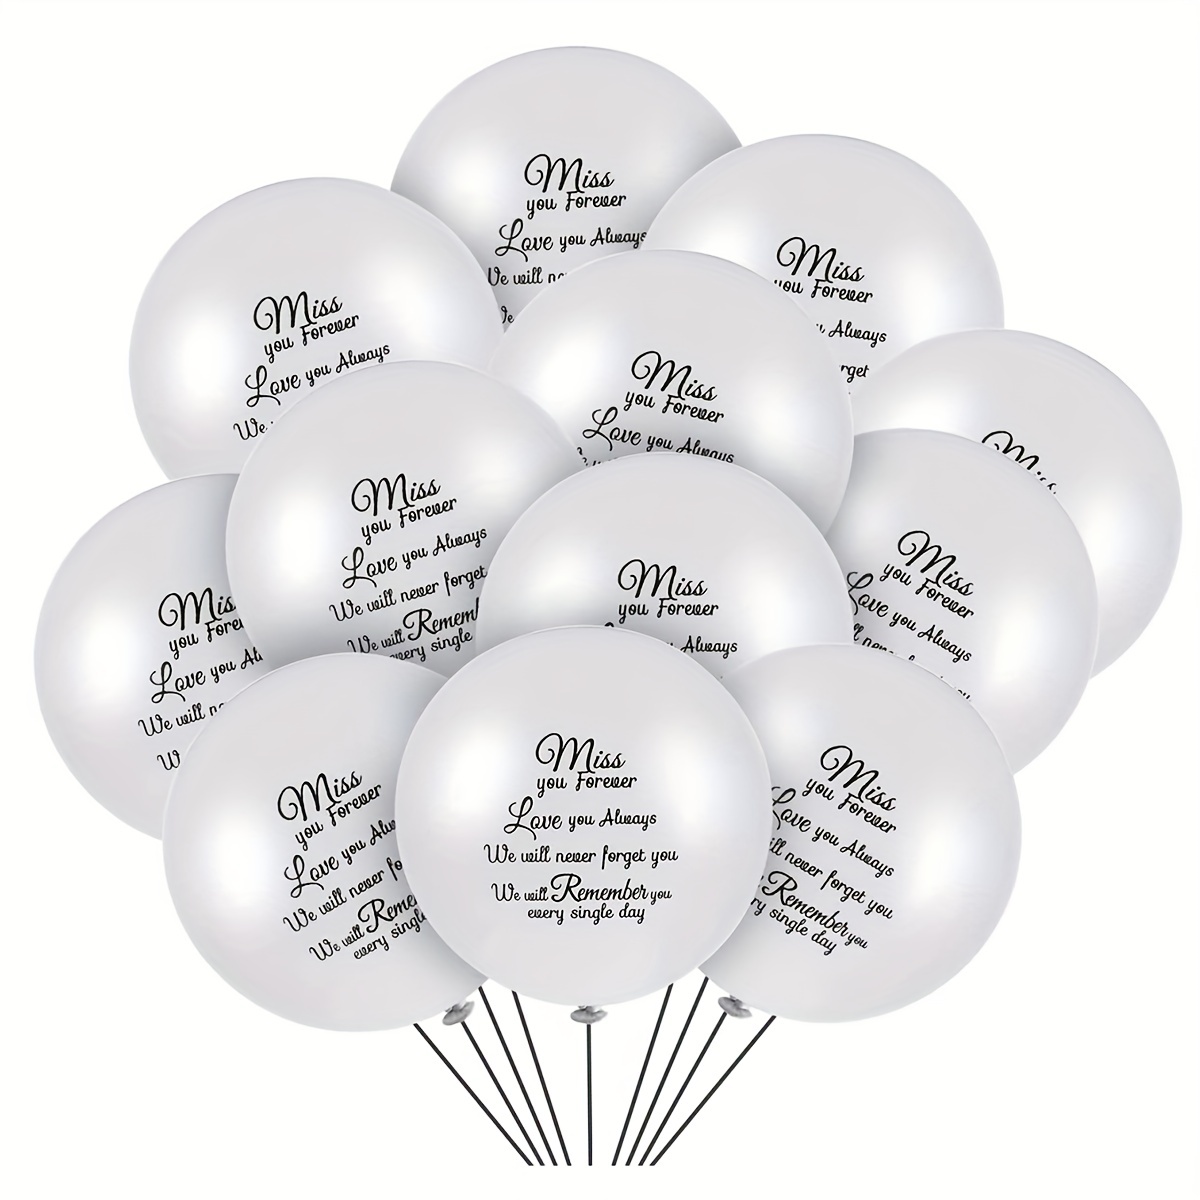 Christmas Decor Memorial Balloons For Release Biodegradable Remembrance  Angel To In Sky Decorations Celebration Of Life RIP Rest Peace Loss